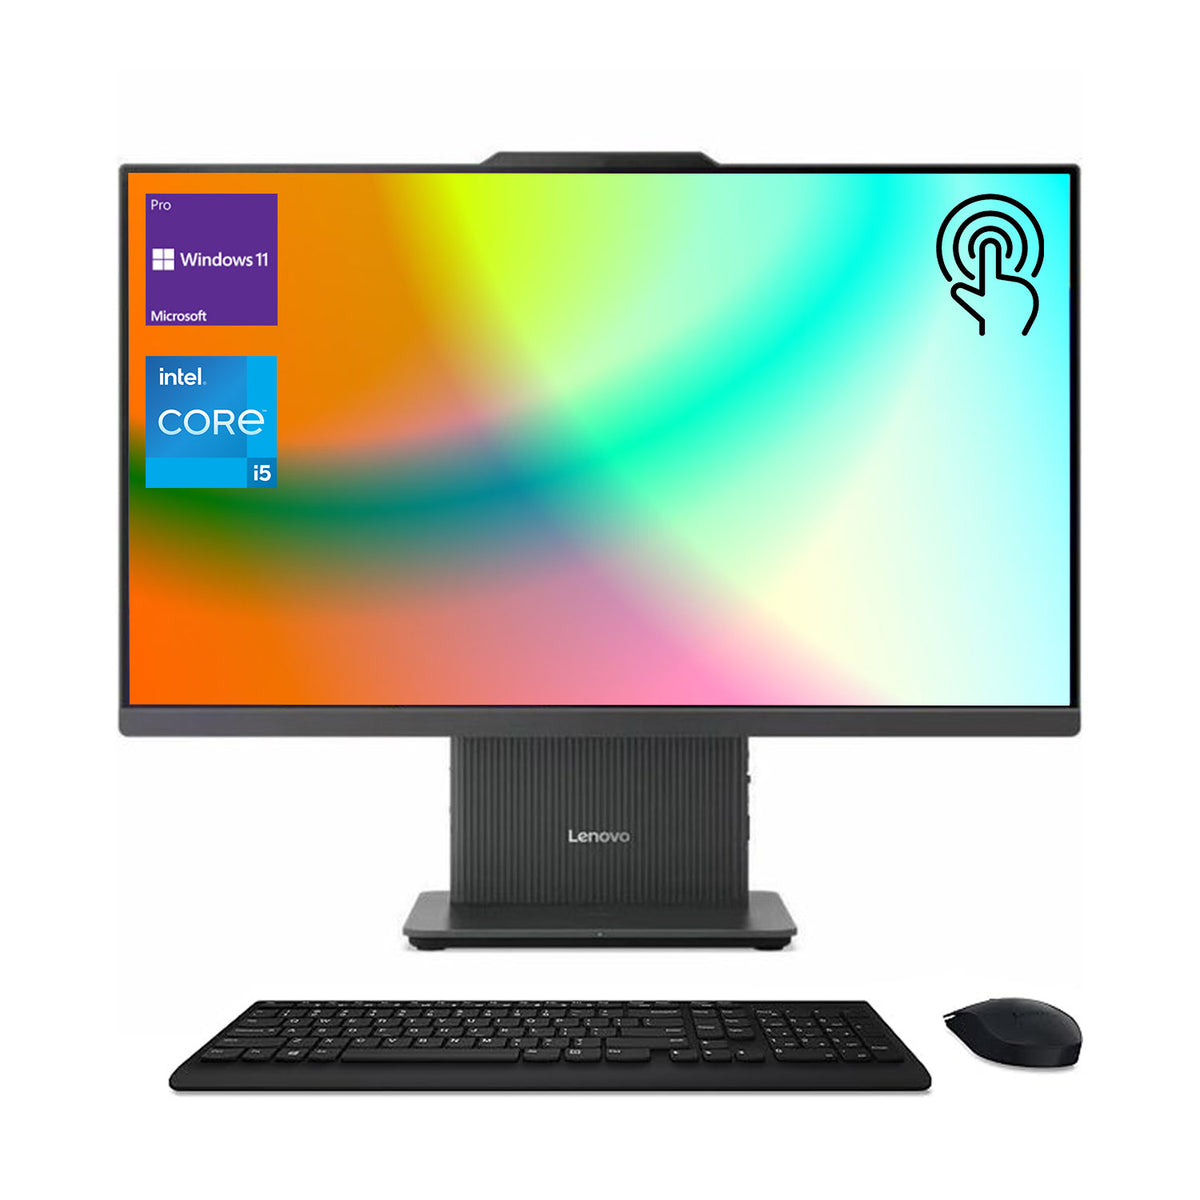 LENOVO IdeaCentre I Gen 9 Daily All-in-One, 23.8" FHD 1920*1080 Touchscreen 100Hz, Intel Core i5-13420H, Intel UHD Graphics, 16GB DDR5 SODIMM, 512GB PCIe M.2 SSD, Wi-Fi 6, Non-backlit Keyboard, Windows 11 Home, Grey